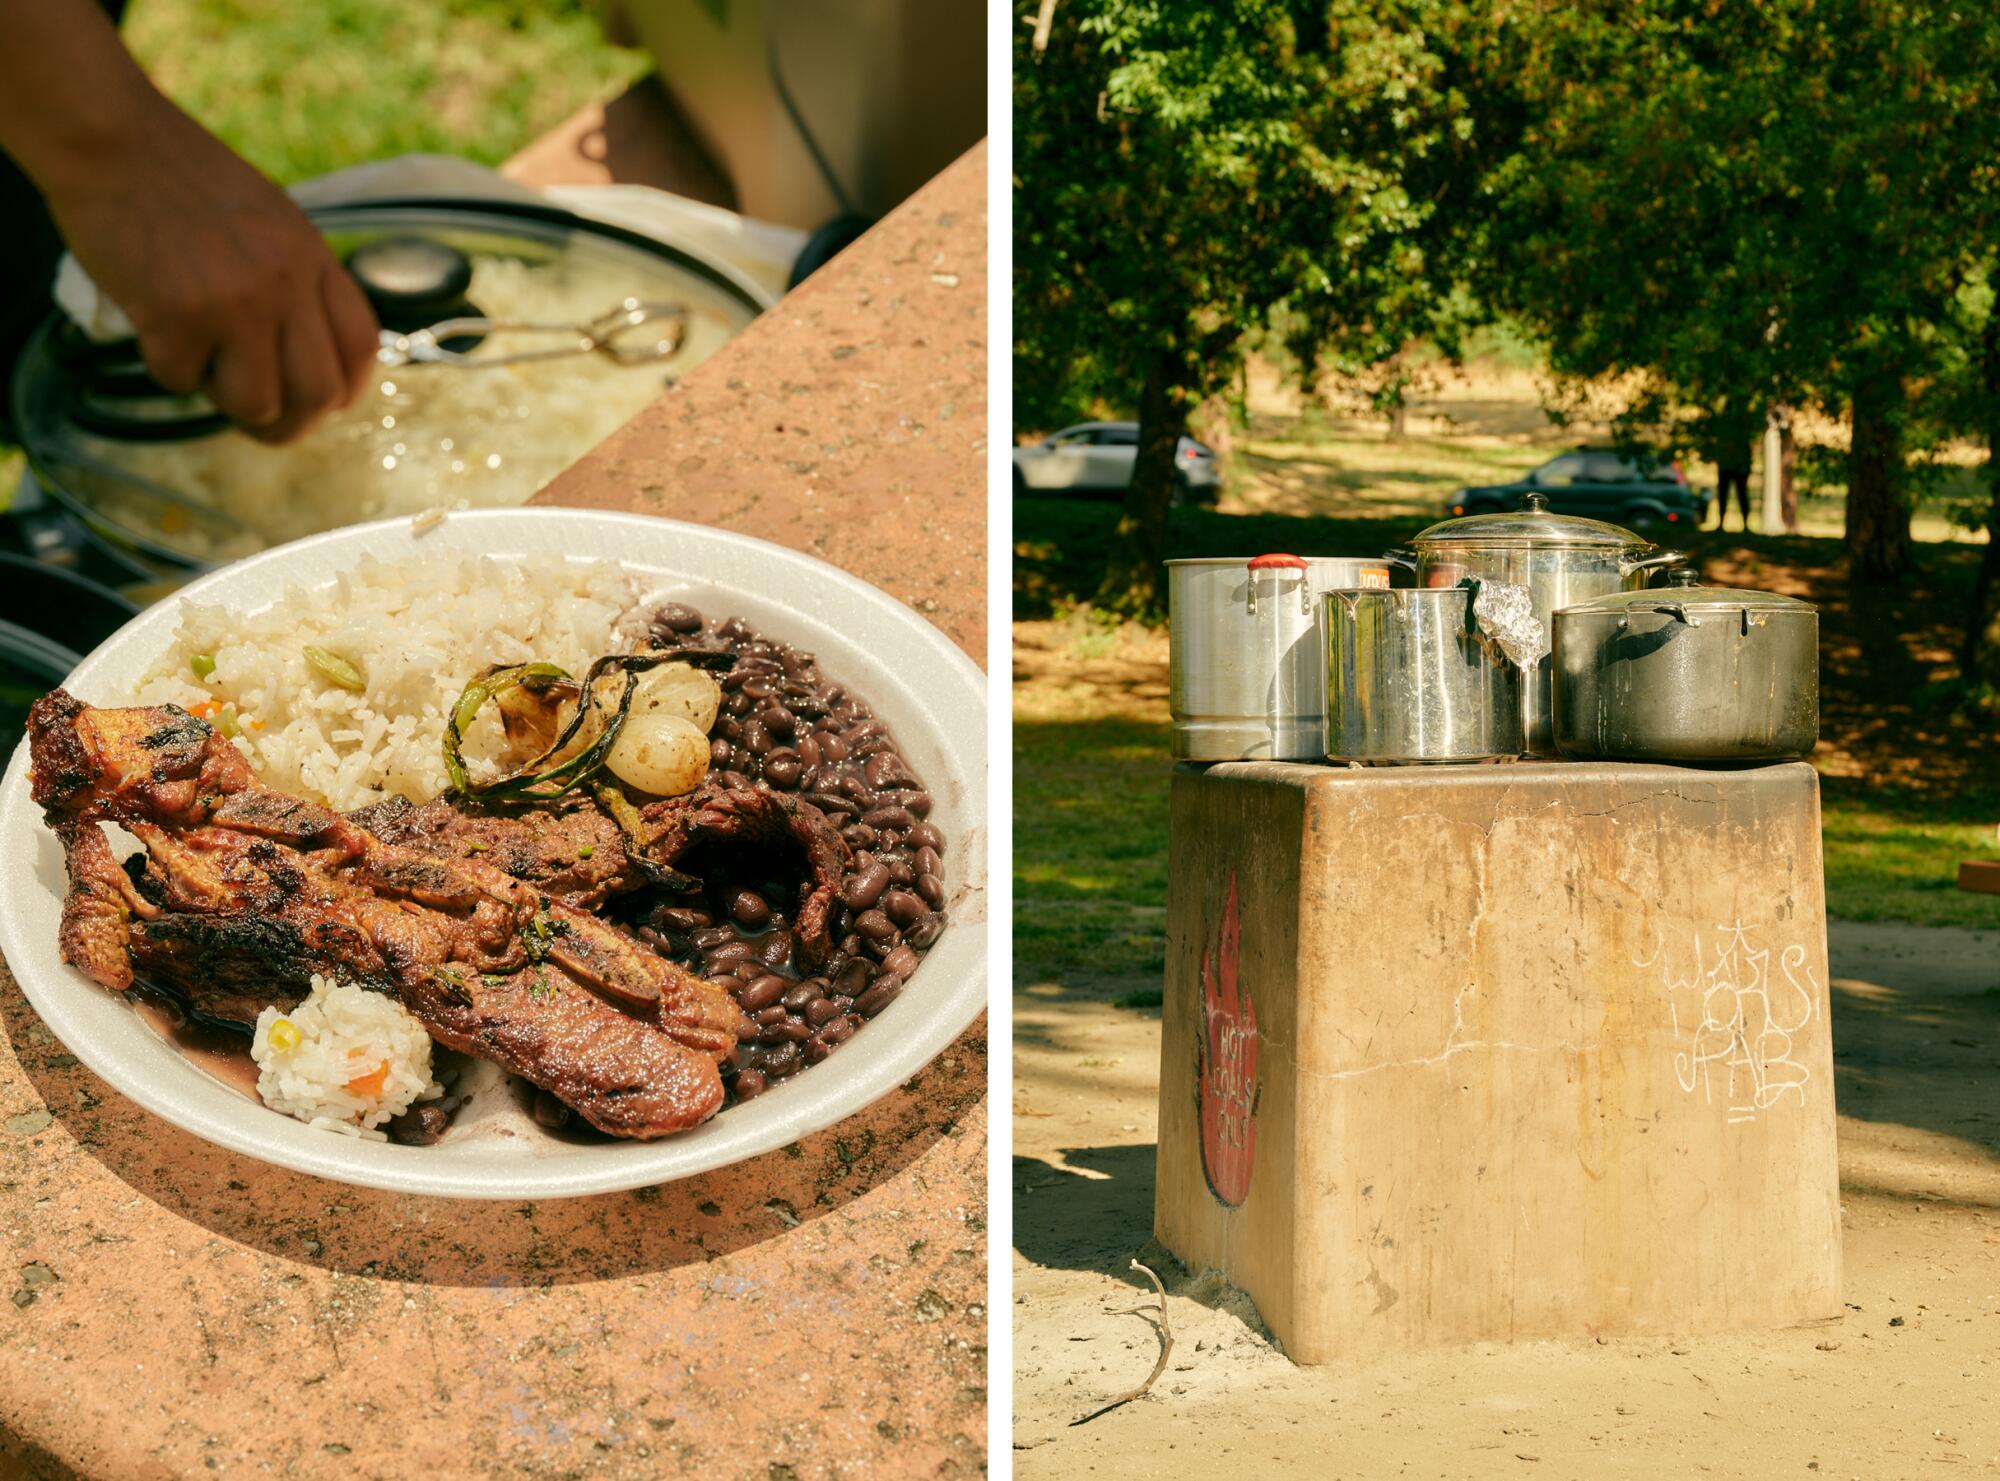 Two photos showing a plate of carne asada and a bunch of pots on an outdoor grill